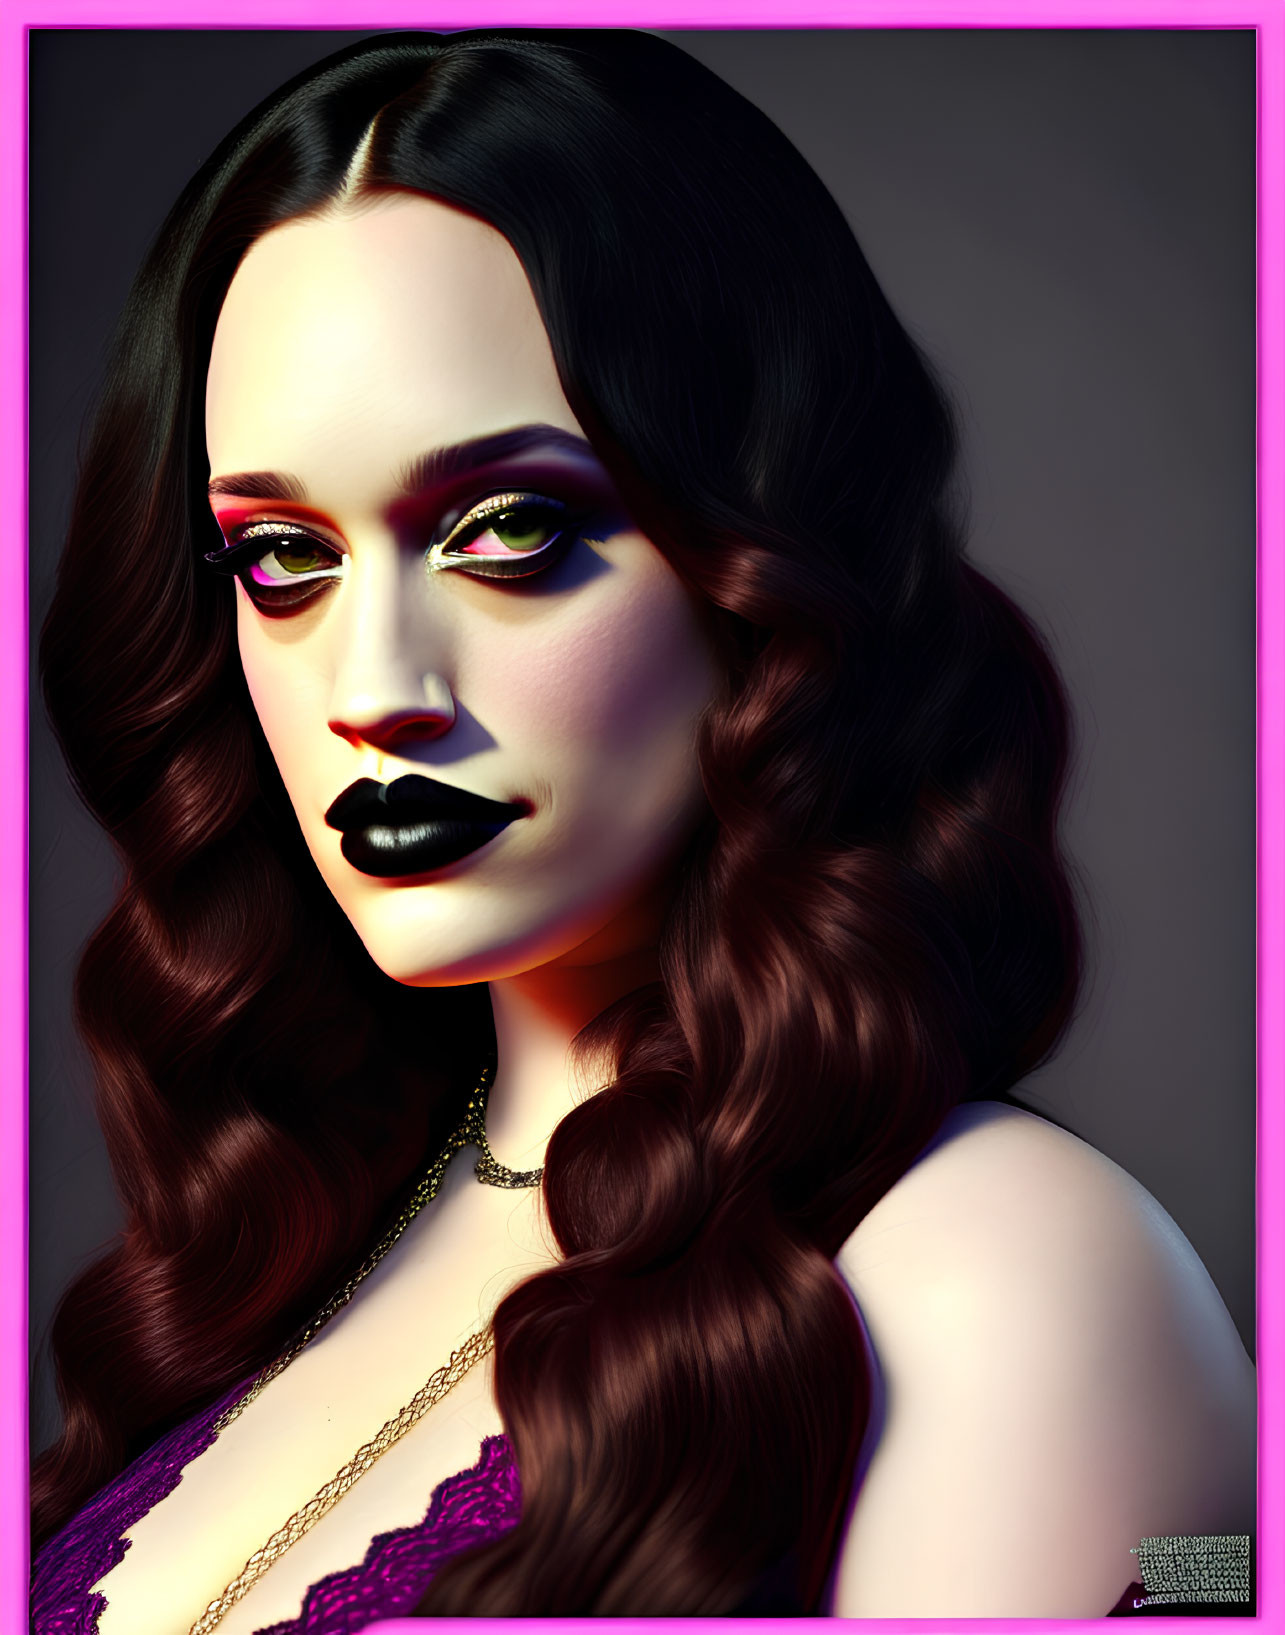 Dark-haired woman with bold makeup on glamorous digital art.